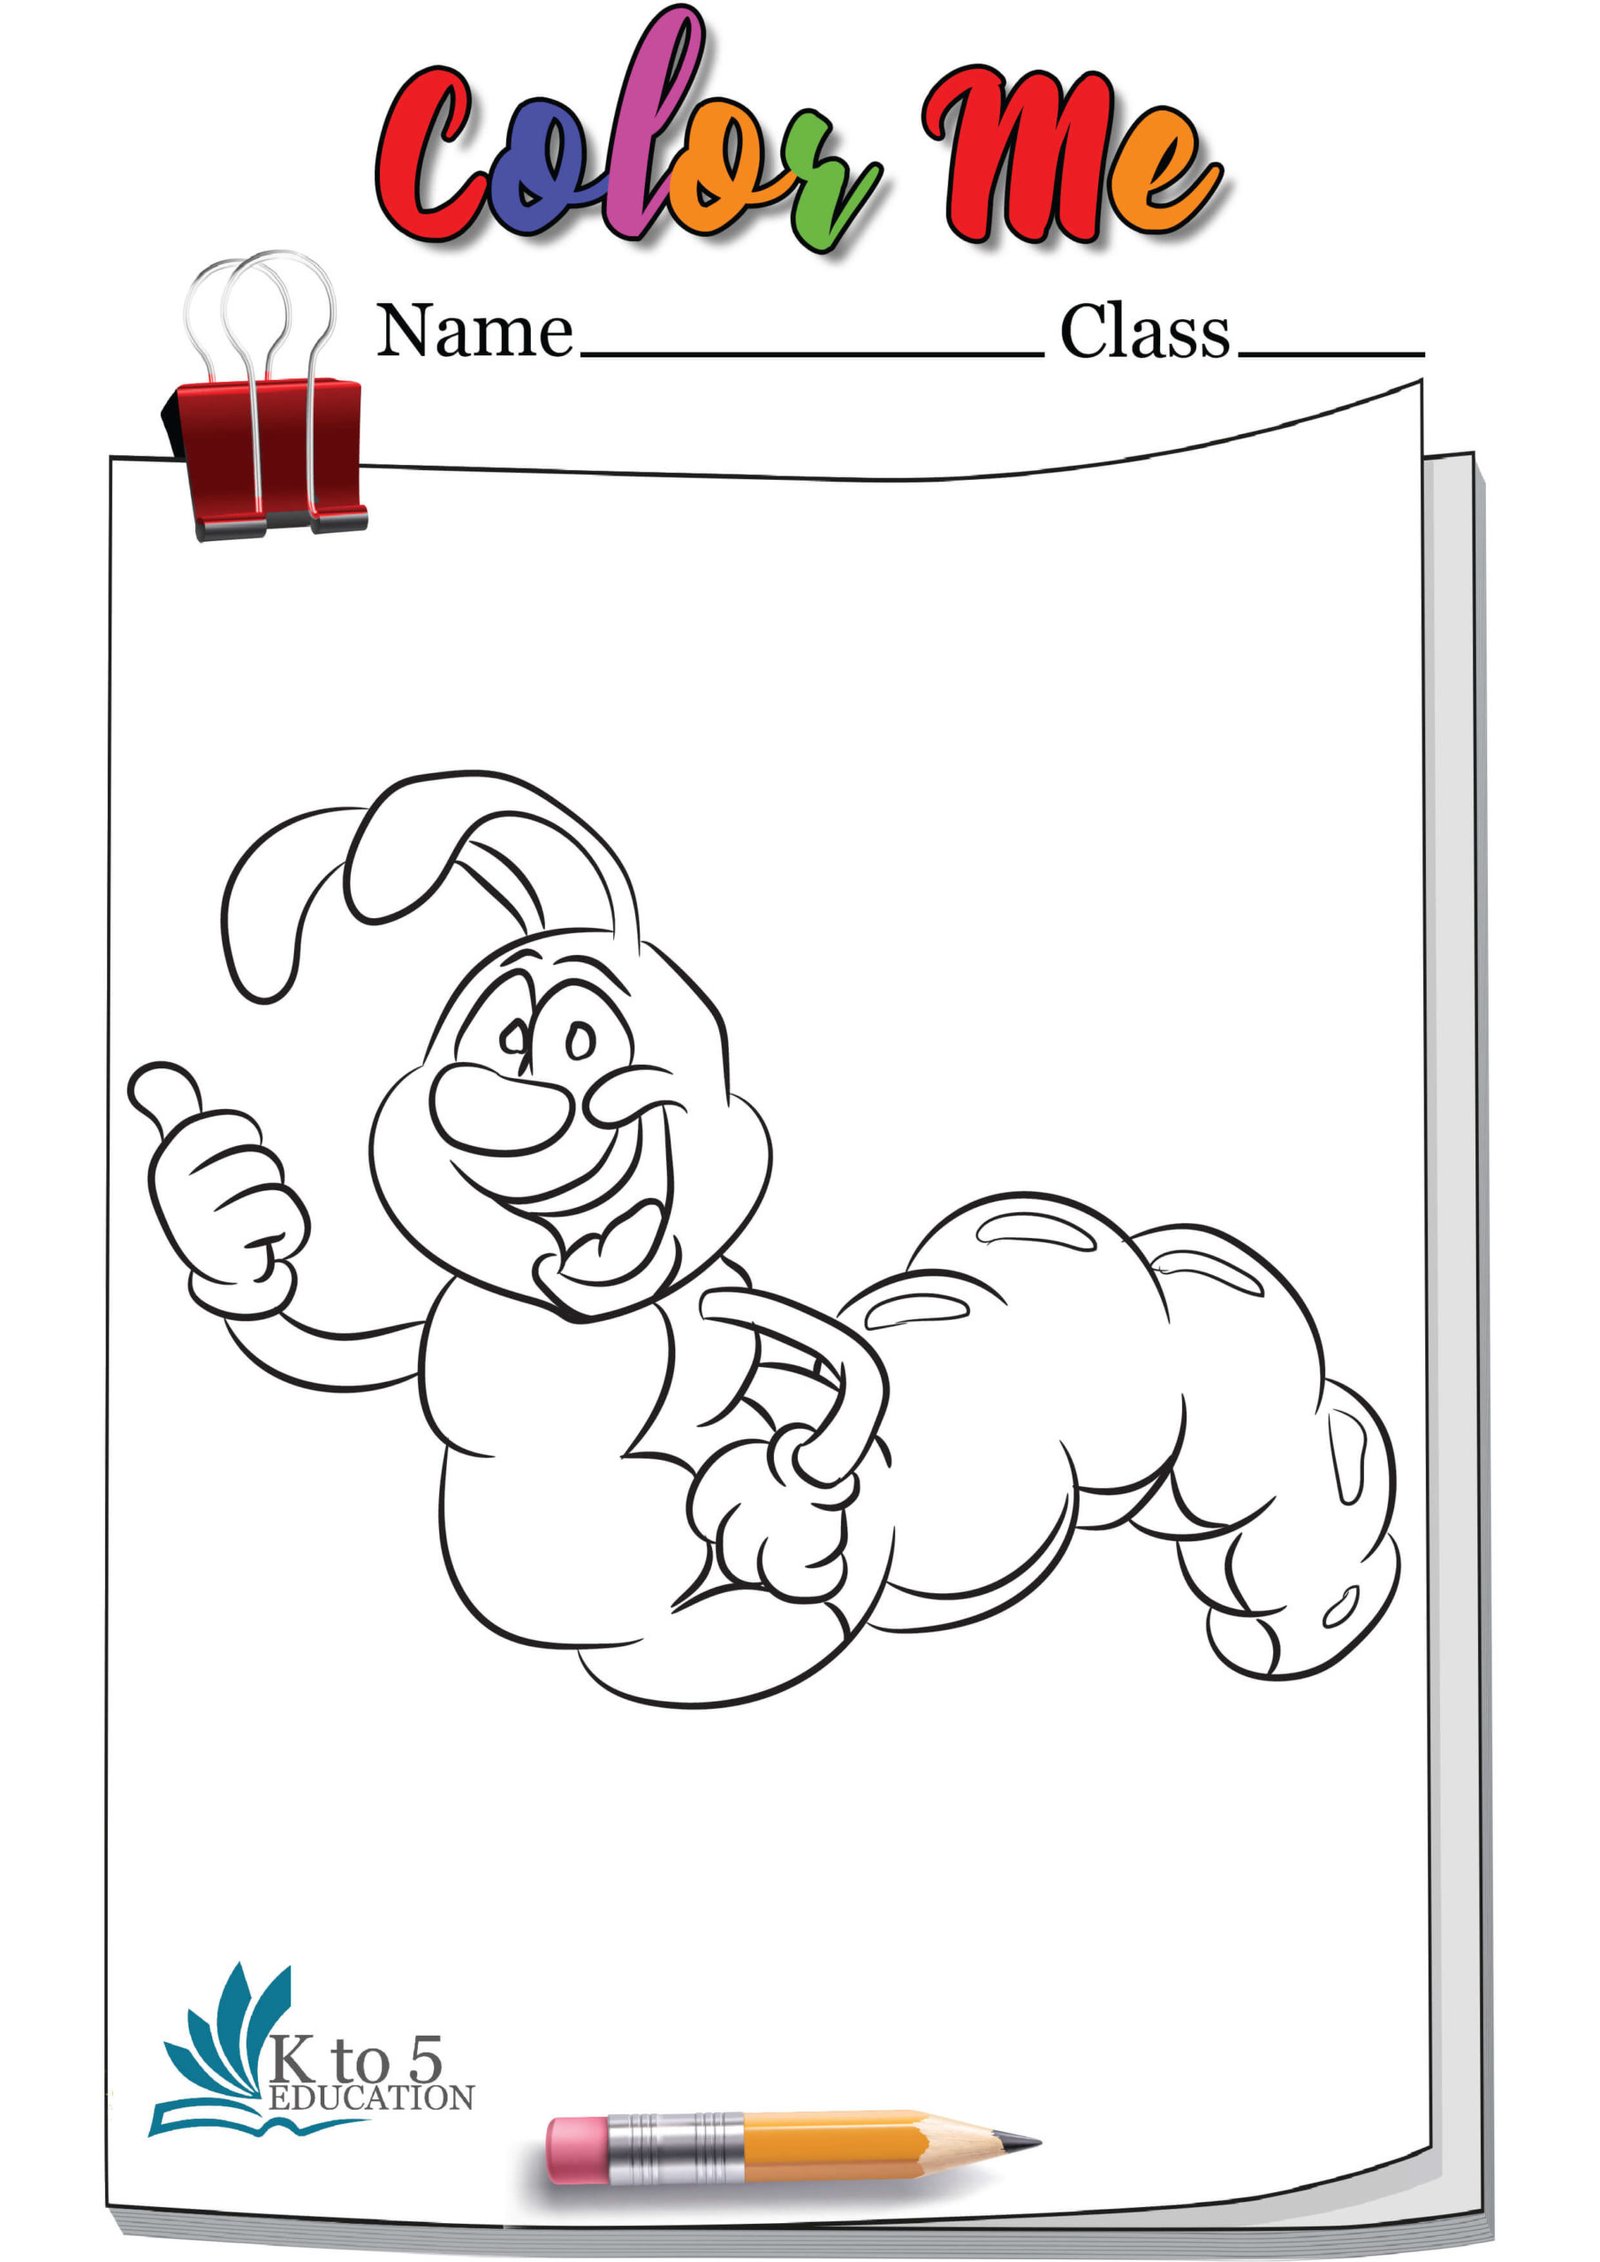 Caterpillar showing Thumbs up Coloring Page